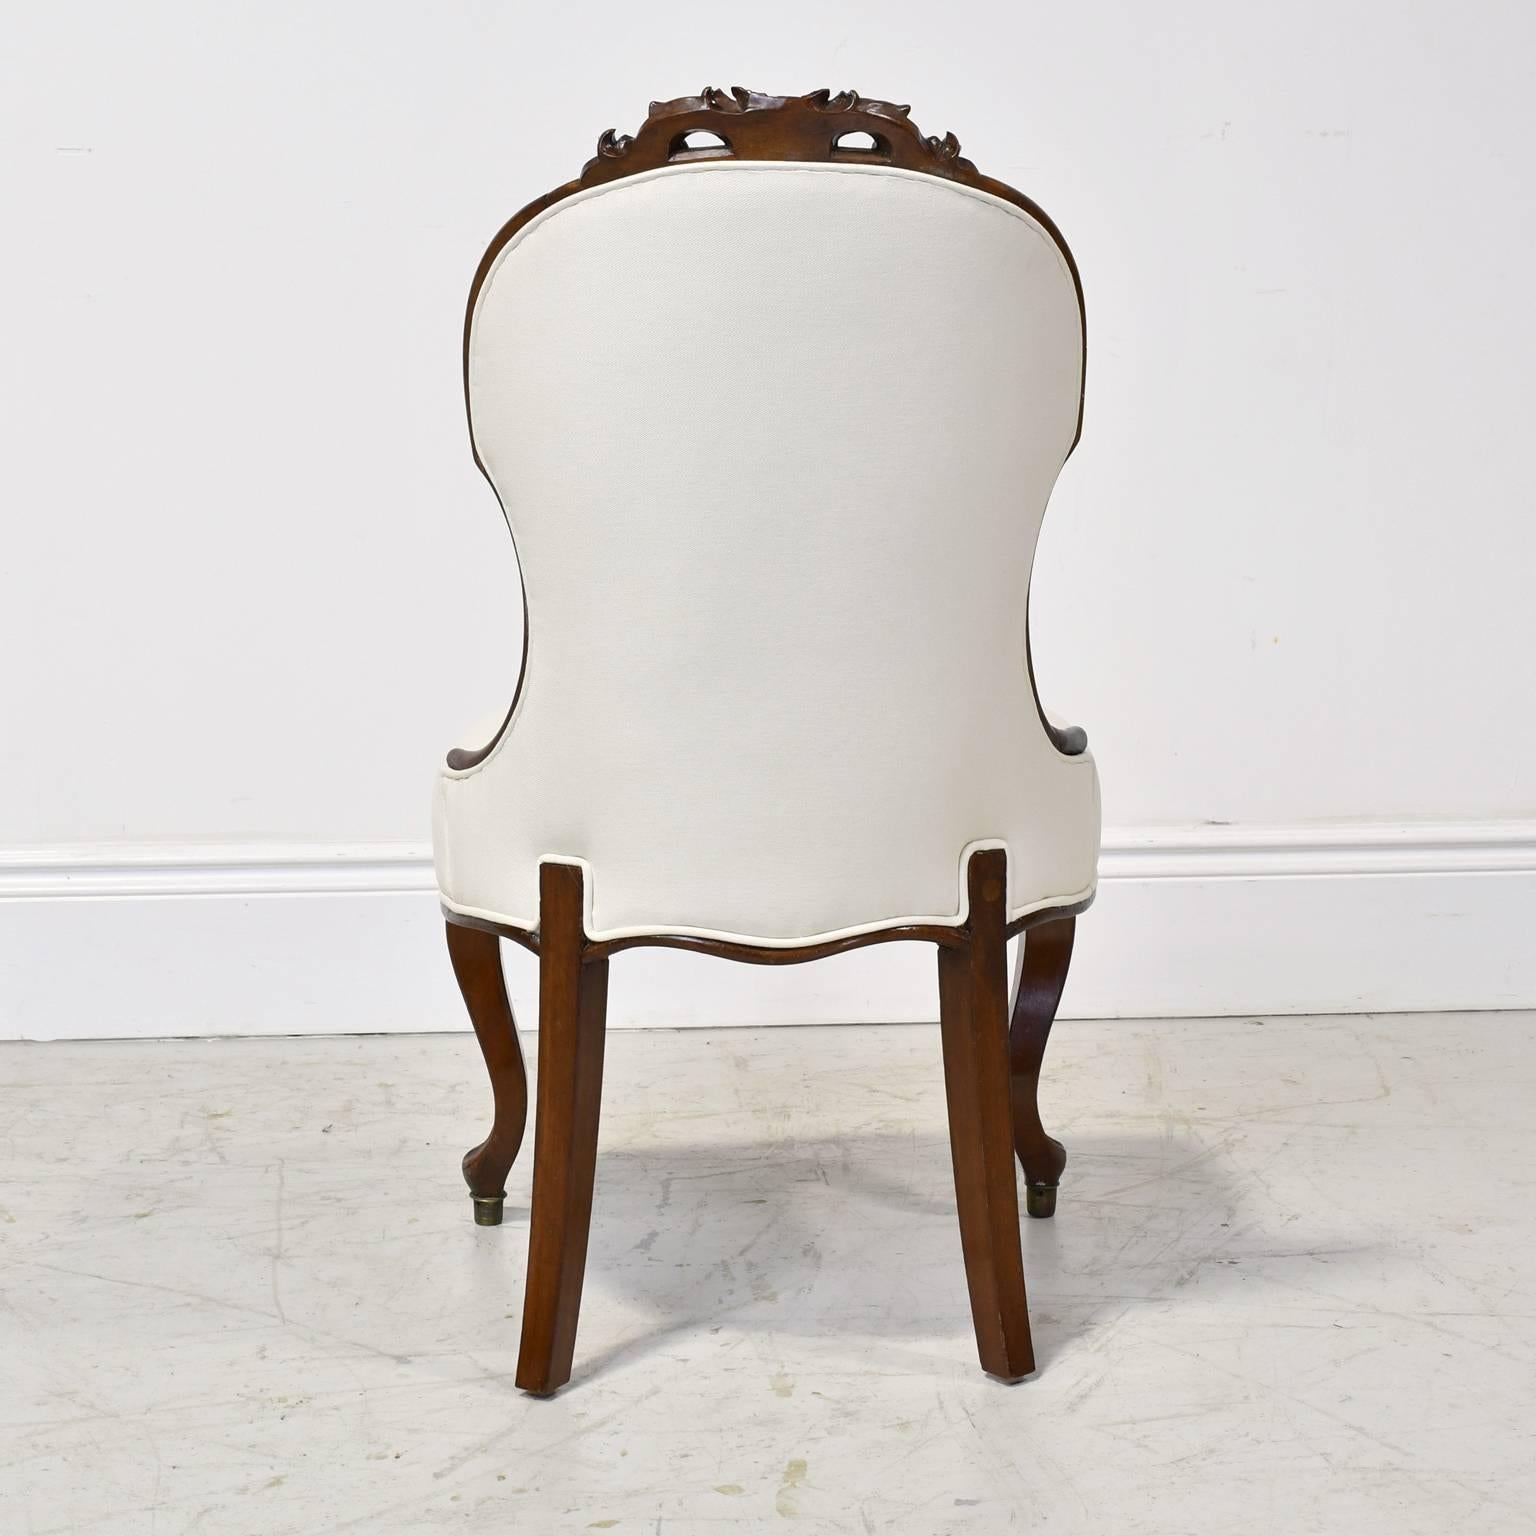 Danish Set of Six Mid-19th Century Dining Chairs with Upholstered Seat and Back